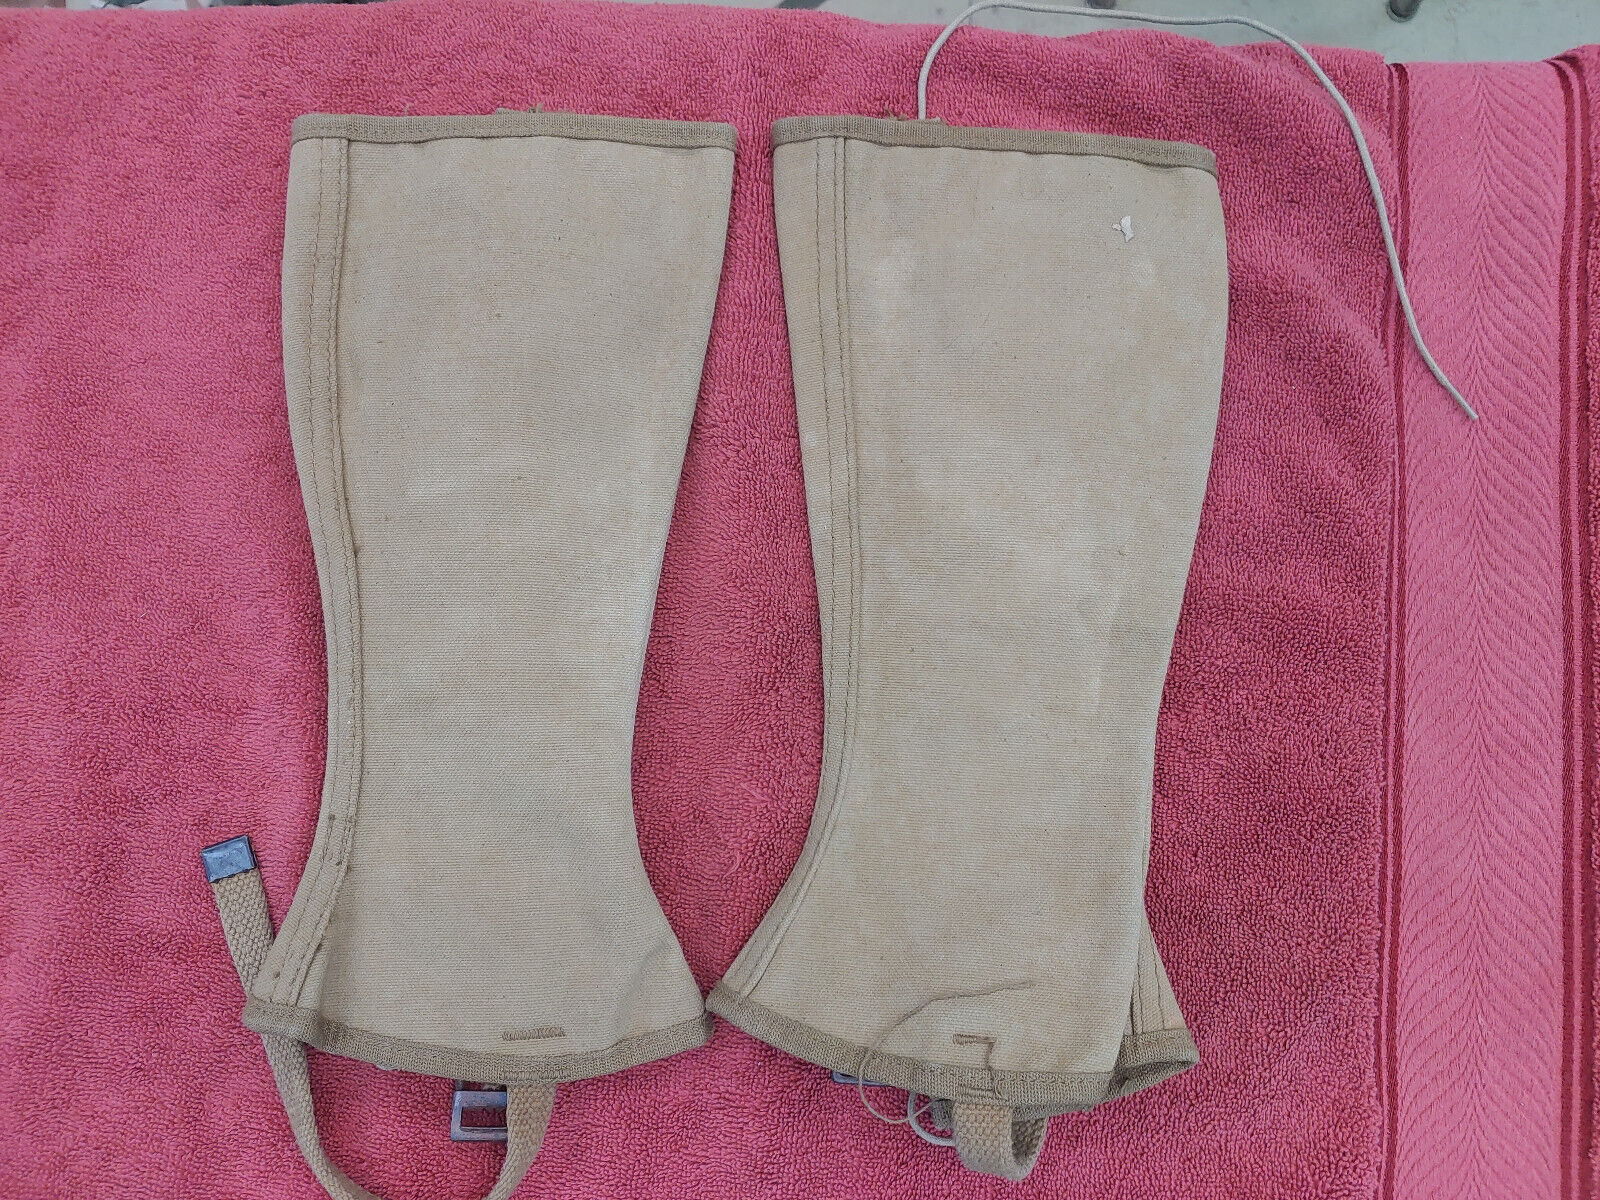 Vintage WW2 era US Army canvas legging boot covers